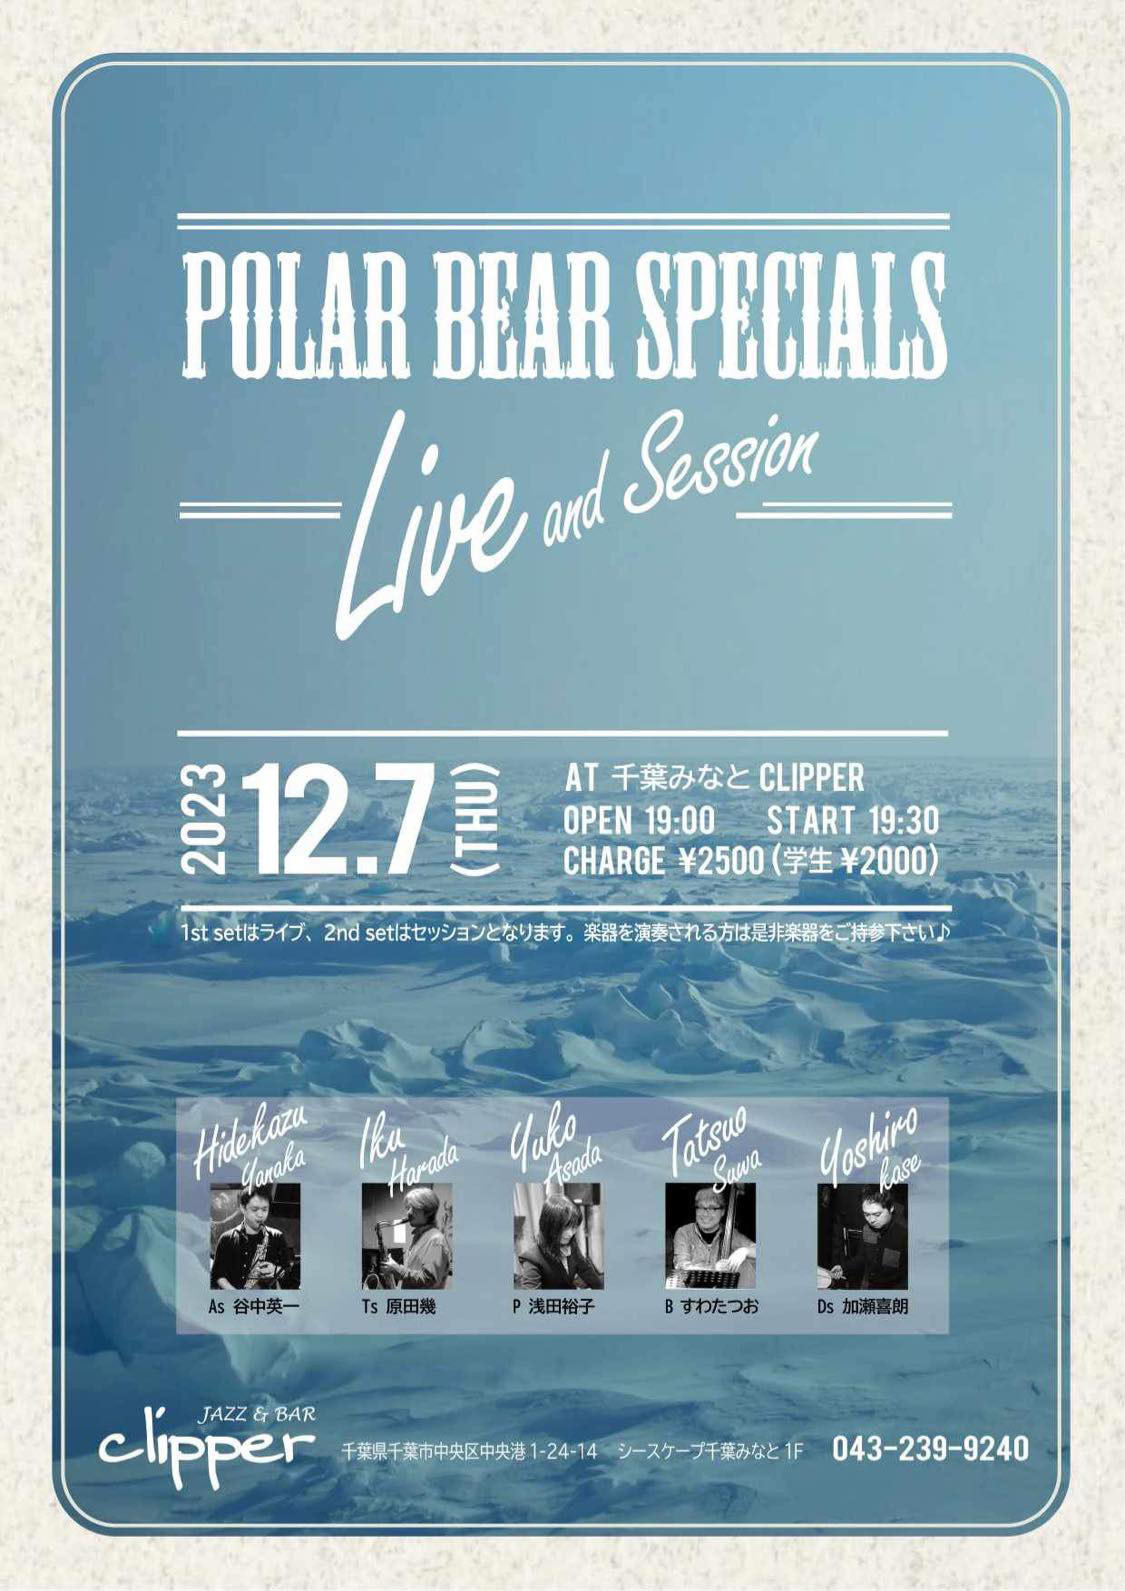 Polar Bear Specials Live and Session